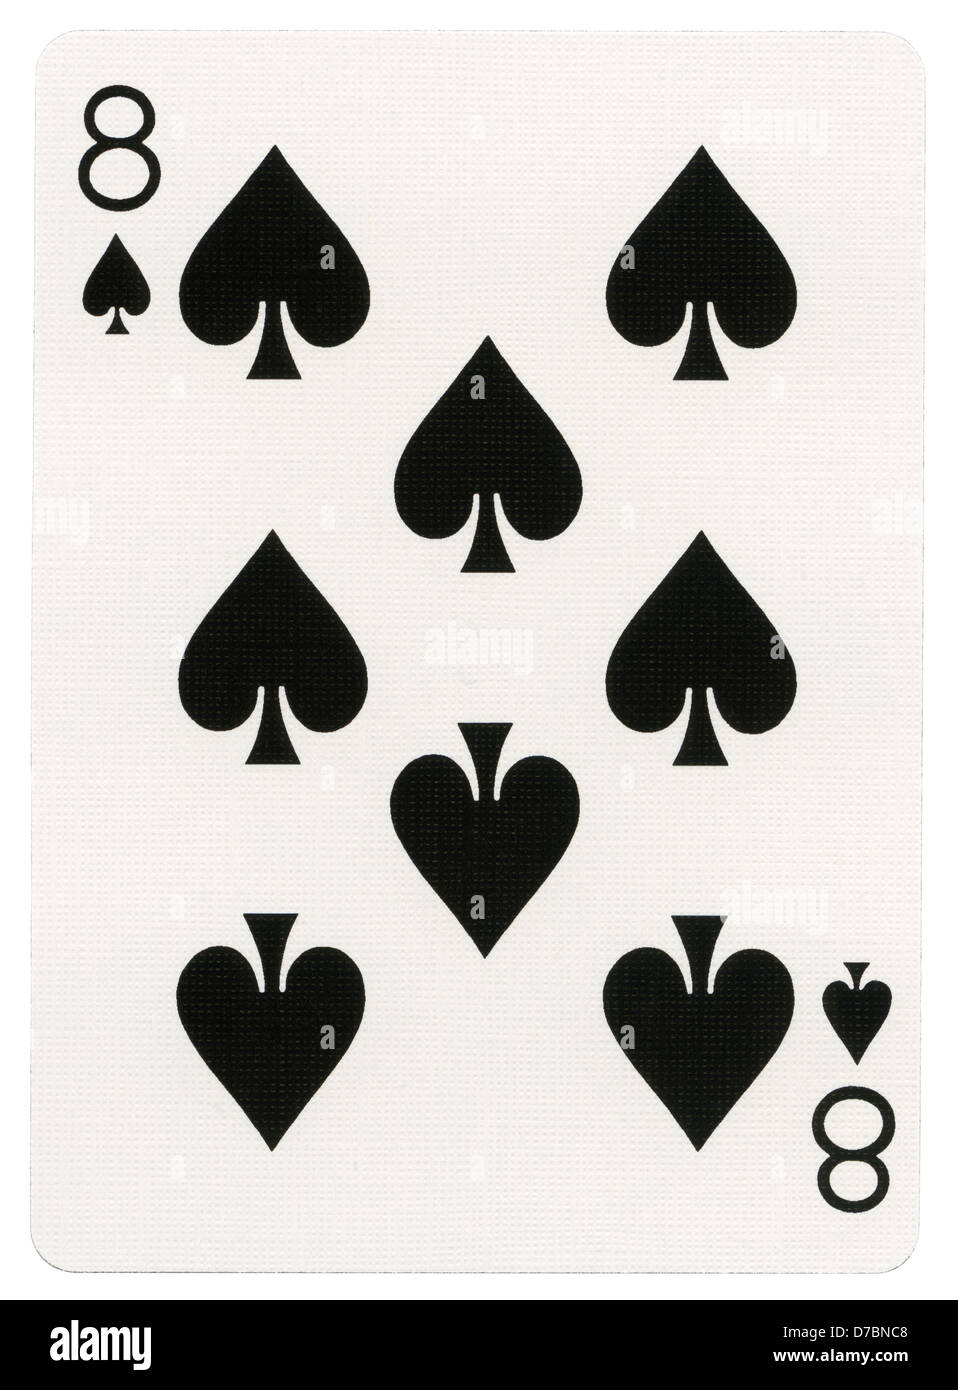 Eight of spades playing card, isolated on white background. Scanned at 2400dpi using Epson V700 professional scanner. Stock Photo